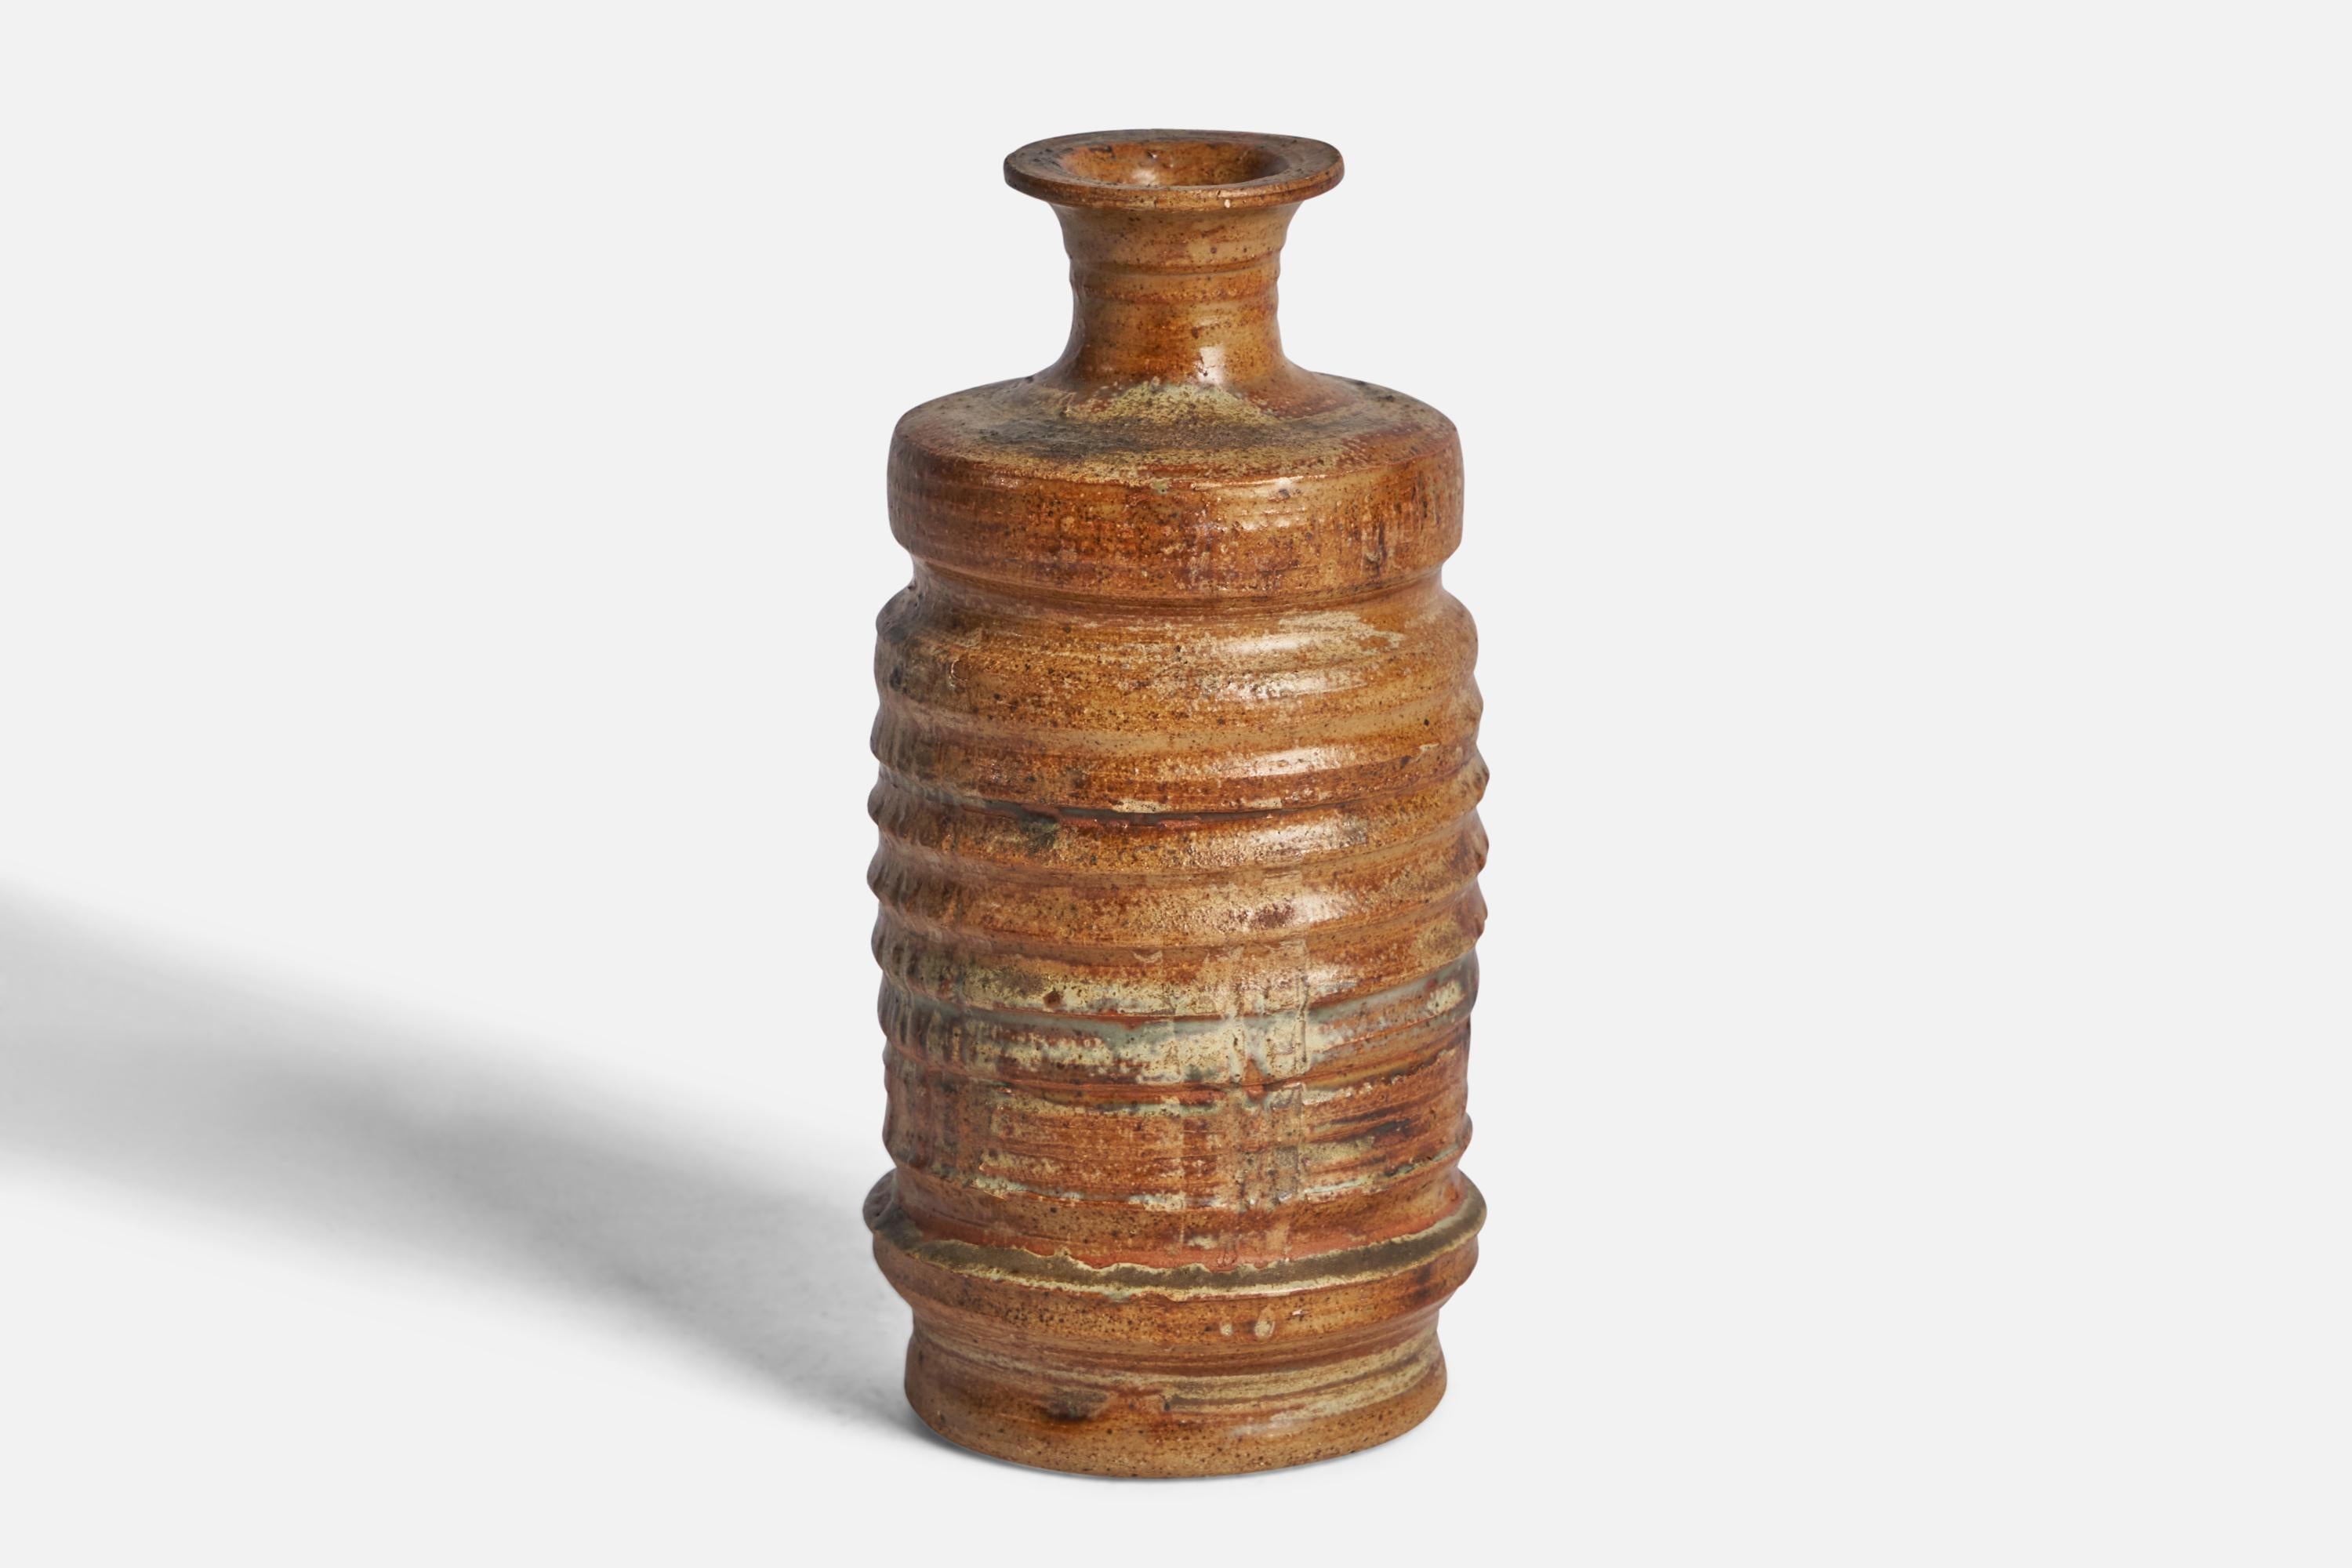 A brown-glazed stoneware vase designed and produced in Sweden, c. 1960s.